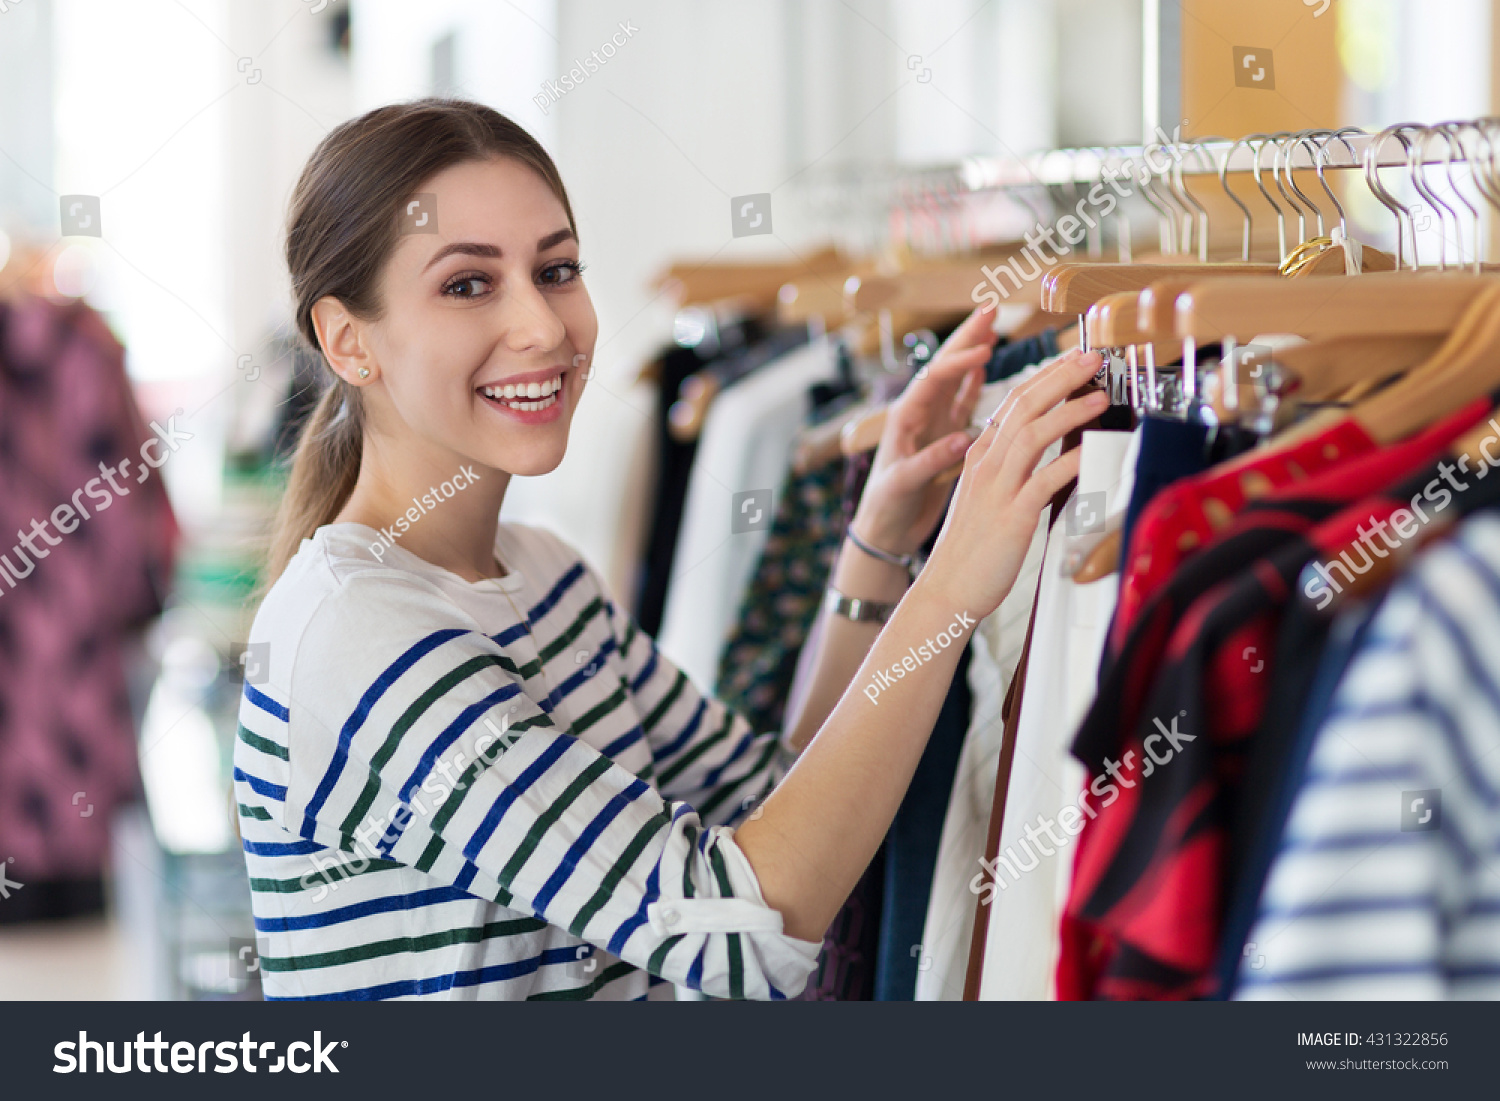 Young Woman Clothing Store Stock Photo 431322856 | Shutterstock